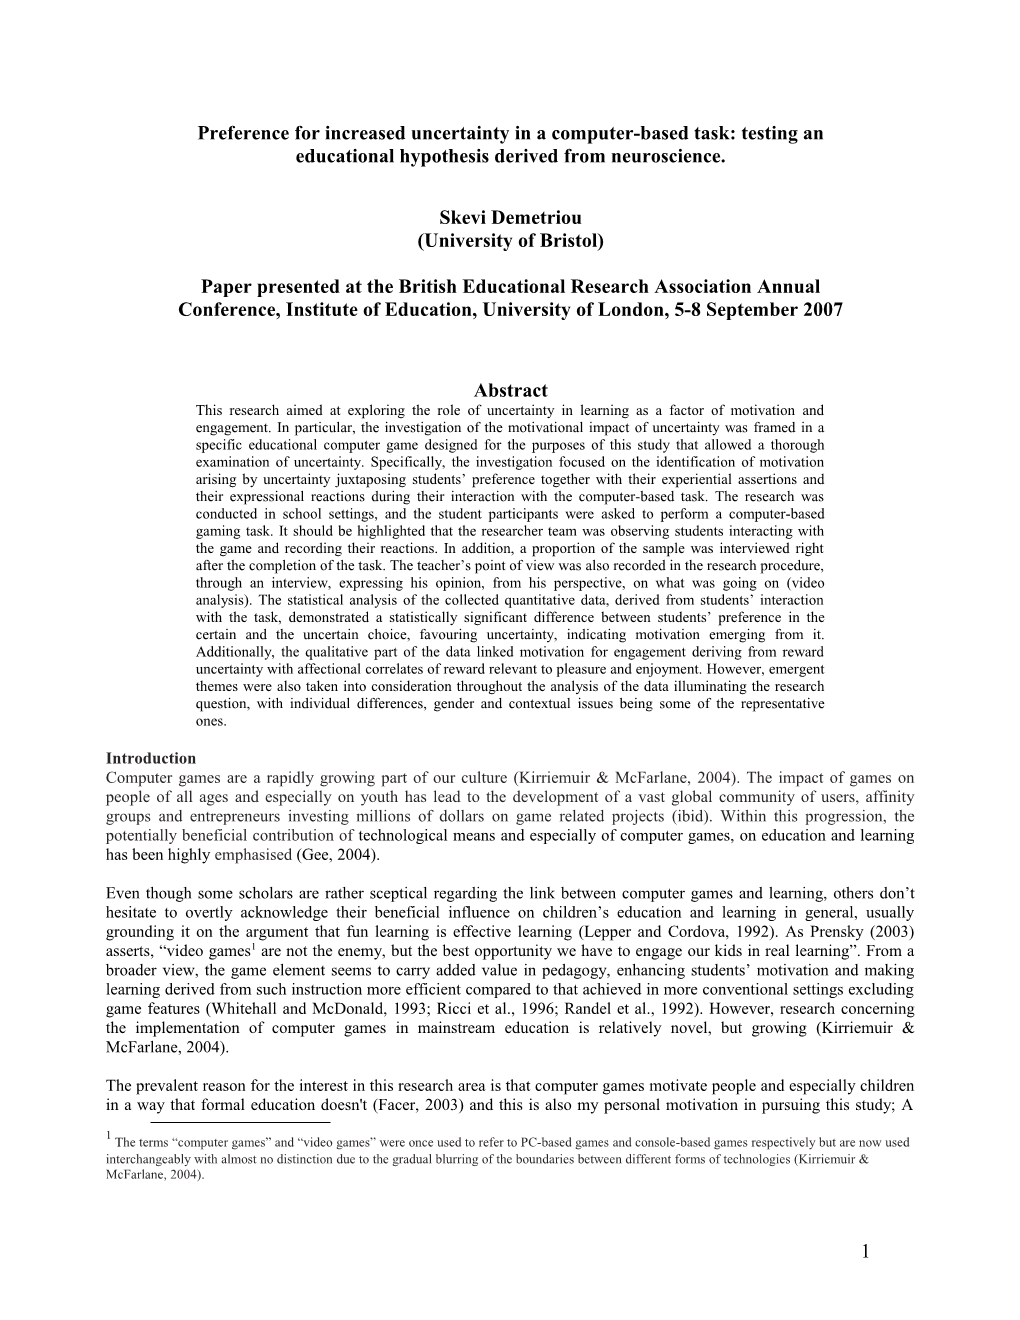 Preference for Increased Uncertainty in a Computer-Based Task: Testing an Educational